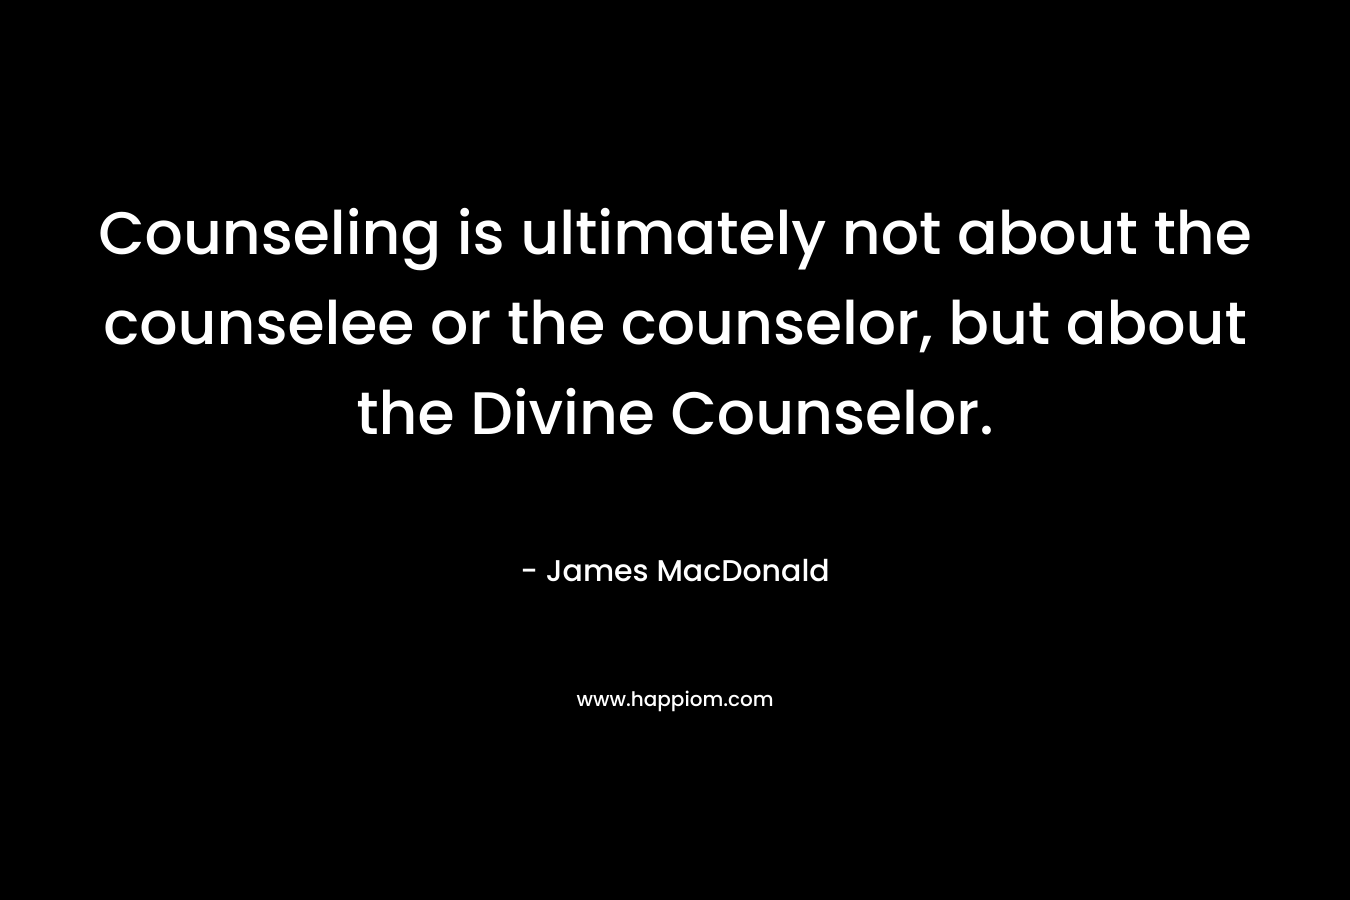 Counseling is ultimately not about the counselee or the counselor, but about the Divine Counselor.